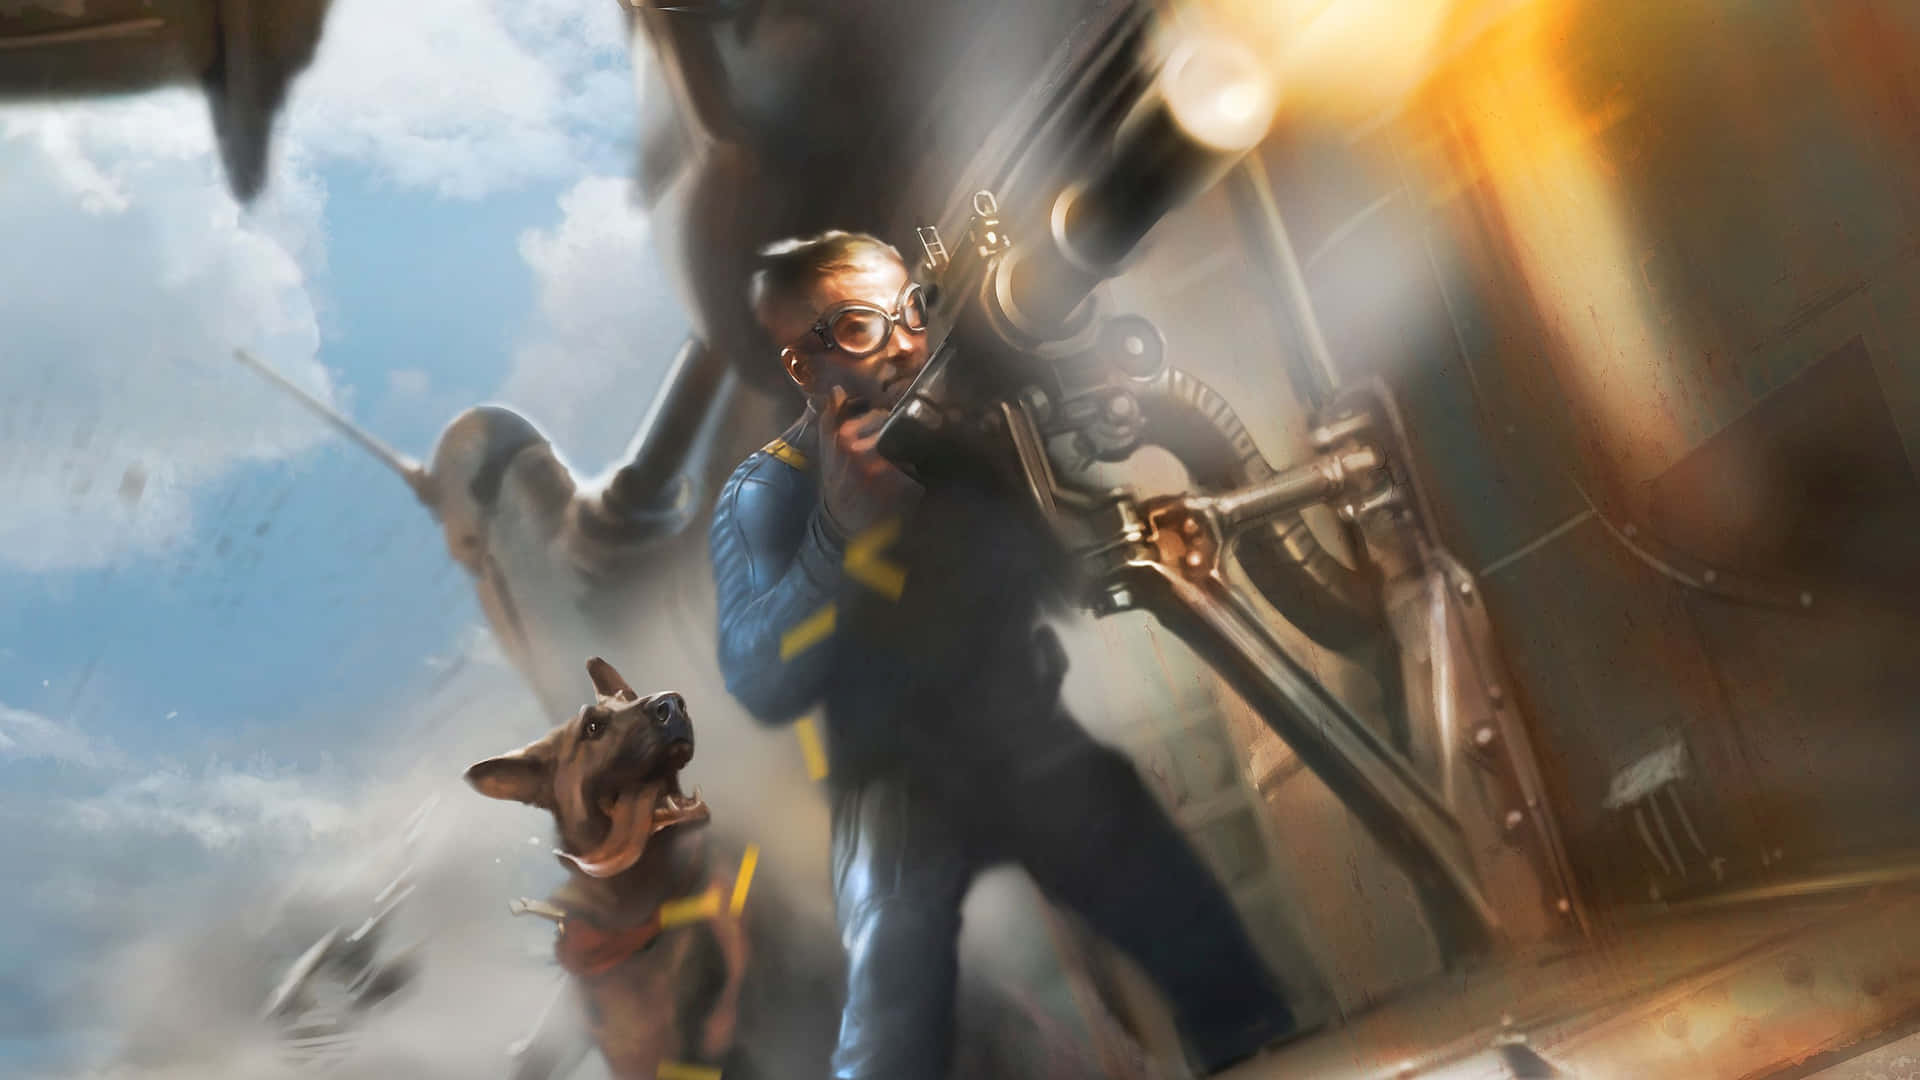 Fallout 4: Dogmeat - A Loyal Companion in the Wasteland Wallpaper